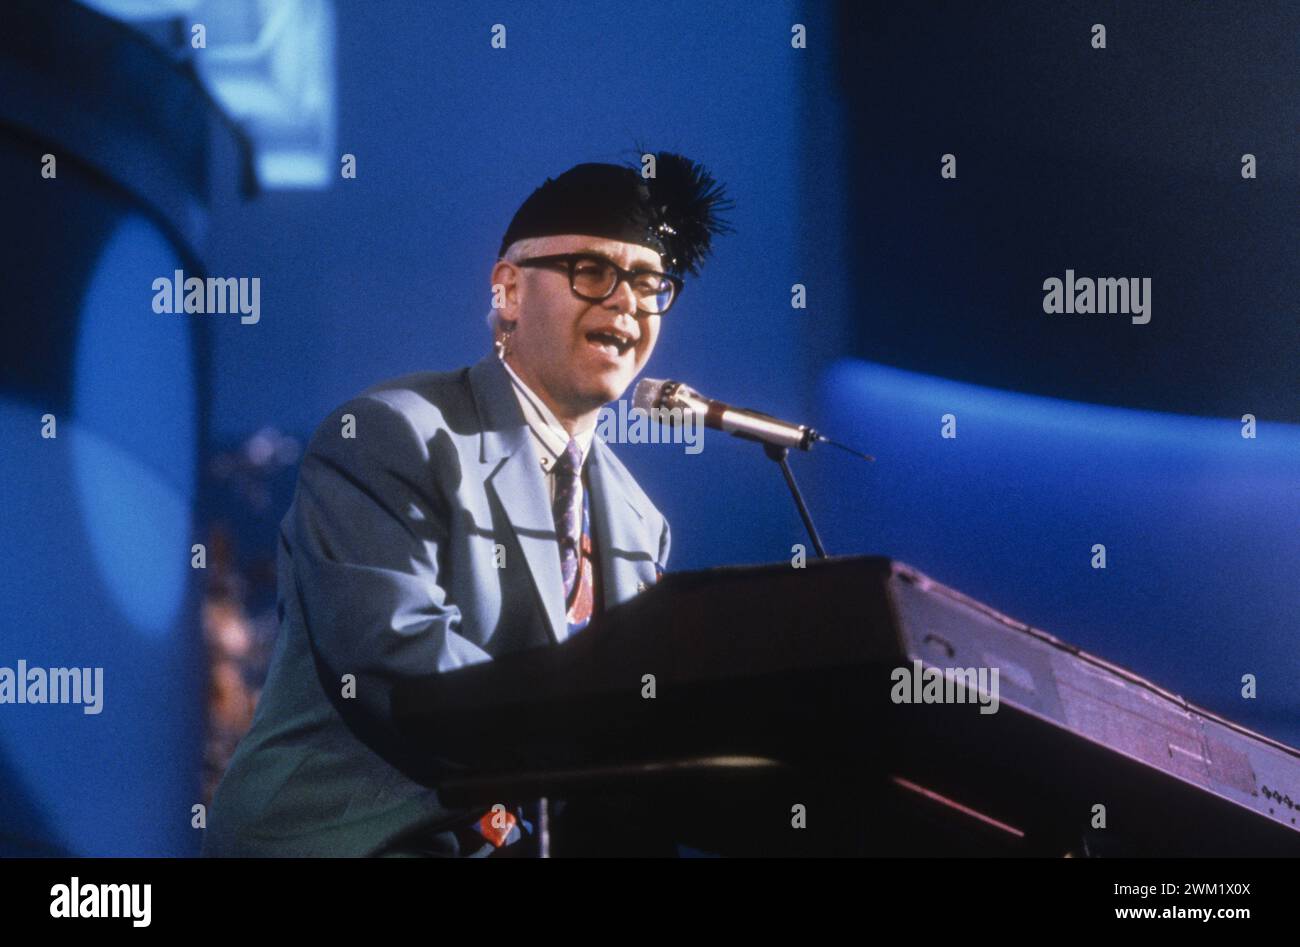 MME4736888 Elton john performing at Sanremo Music Festival 1989/Elton John ospite al Festival di Sanremo 1989 -; (add.info.: Elton john performing at Sanremo Music Festival 1989/Elton John ospite al Festival di Sanremo 1989 -); © Marcello Mencarini. All rights reserved 2024. Stock Photo